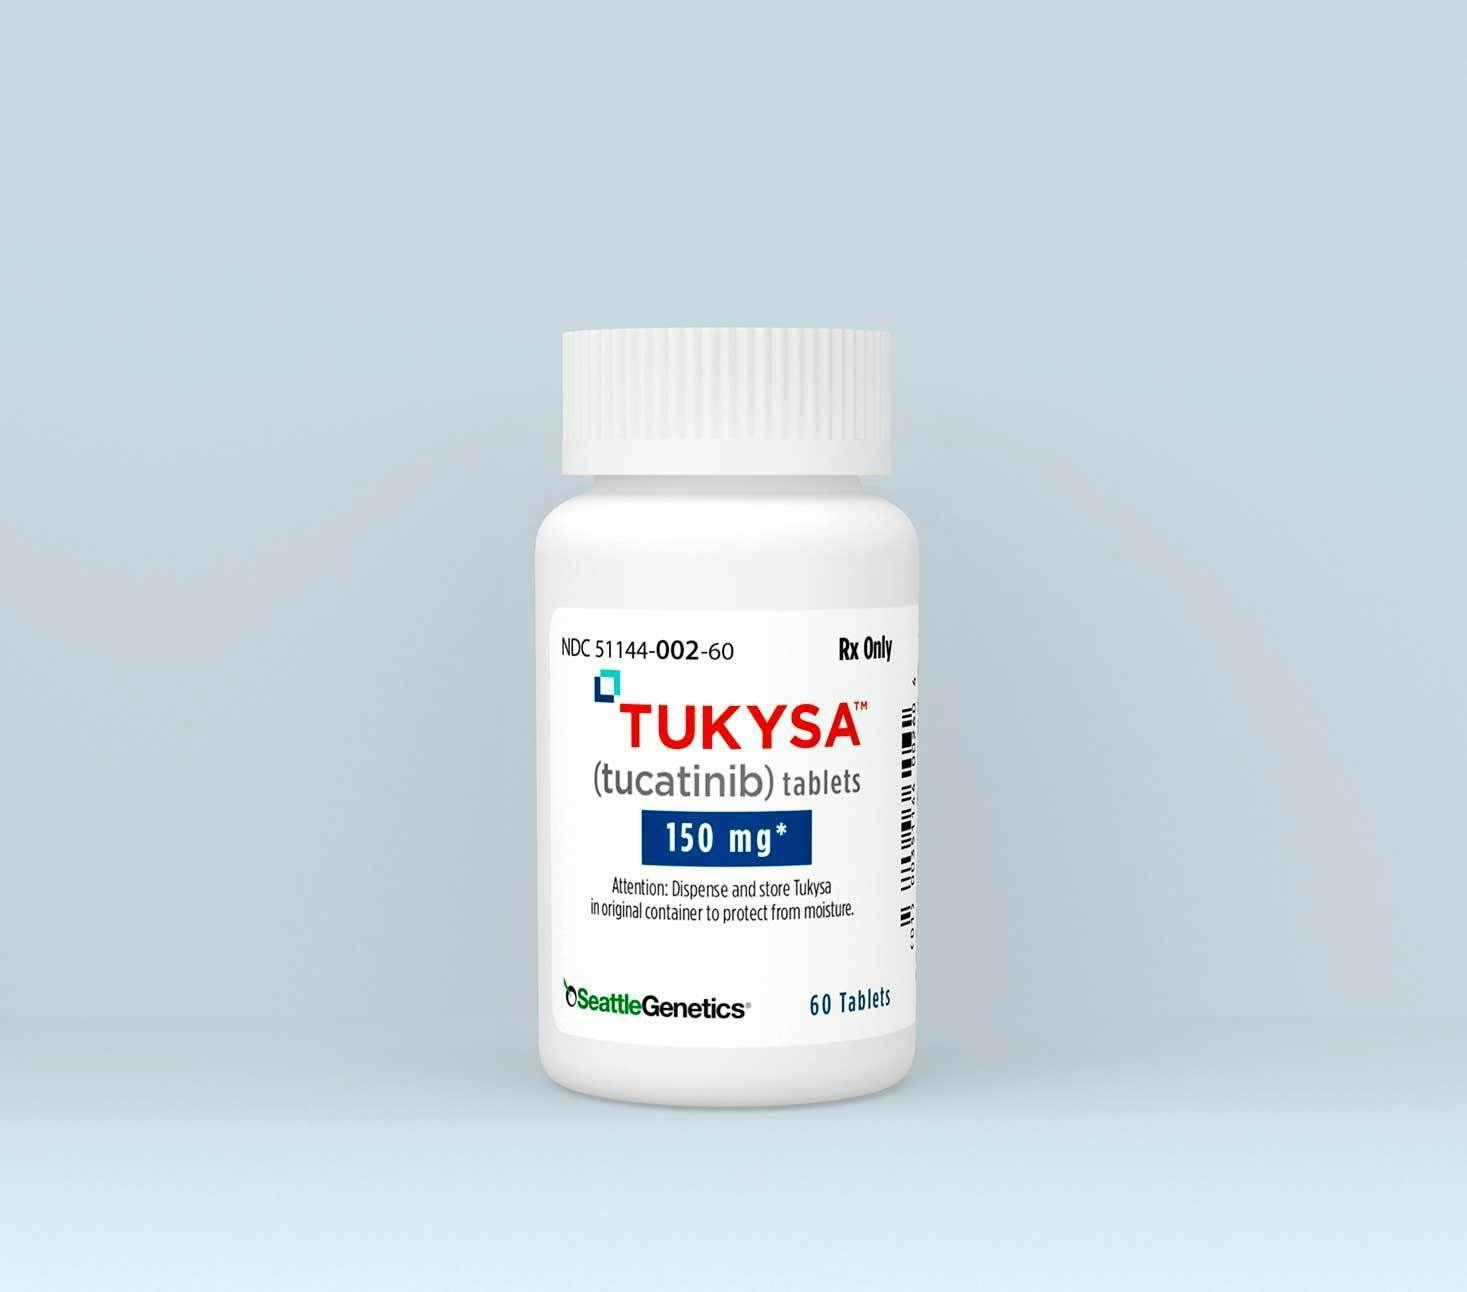 FDA Approves Tukysa for HER2 Positive Colorectal Cancer